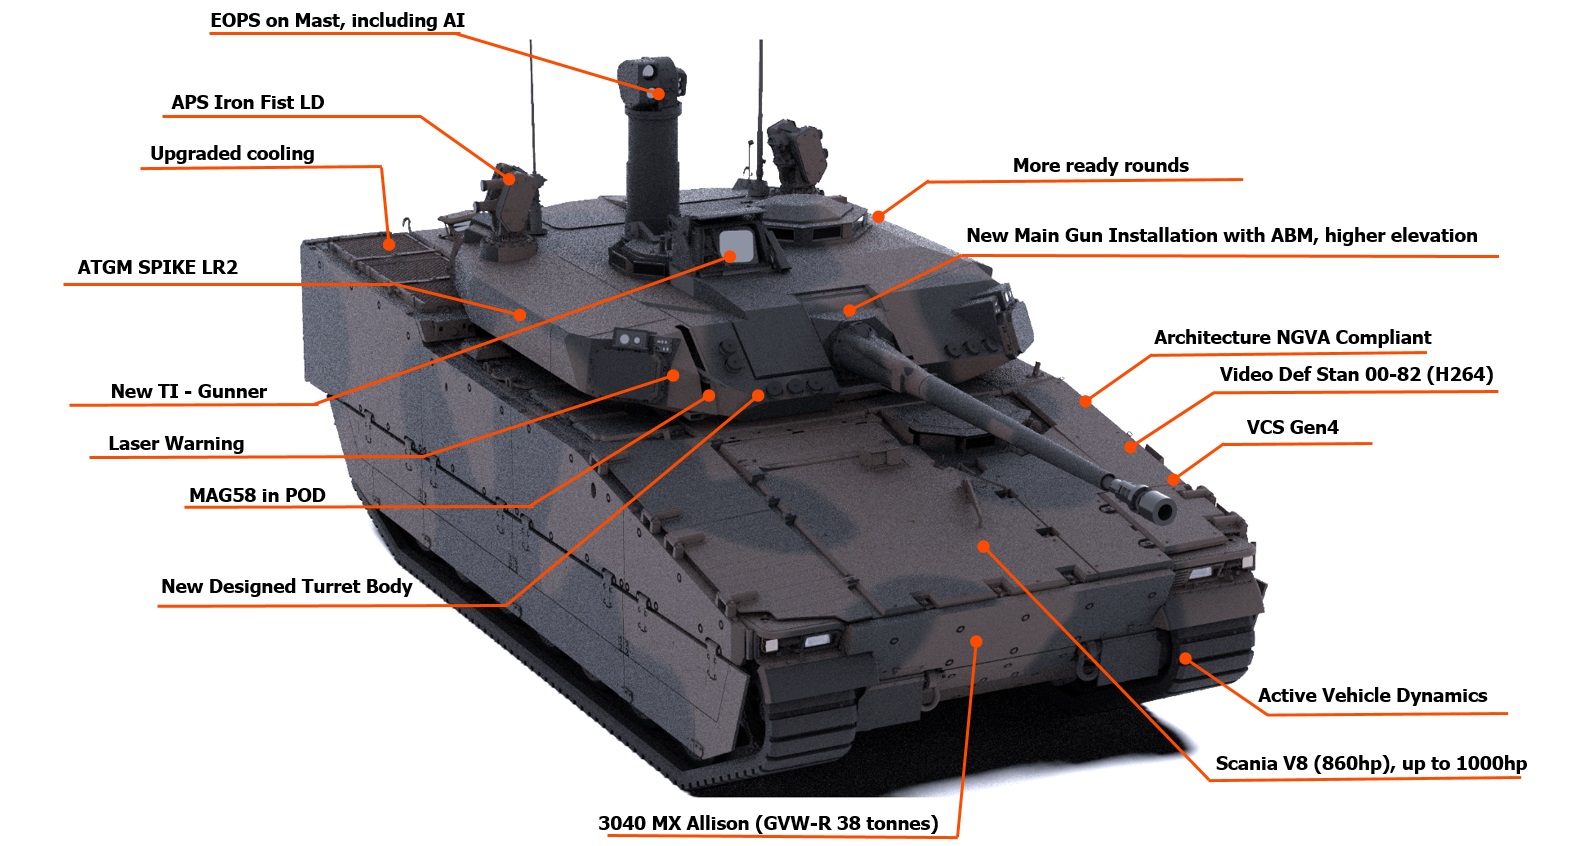 BAE Systems HÃ¤gglunds details the Royal Netherlands Army CV90 MLU